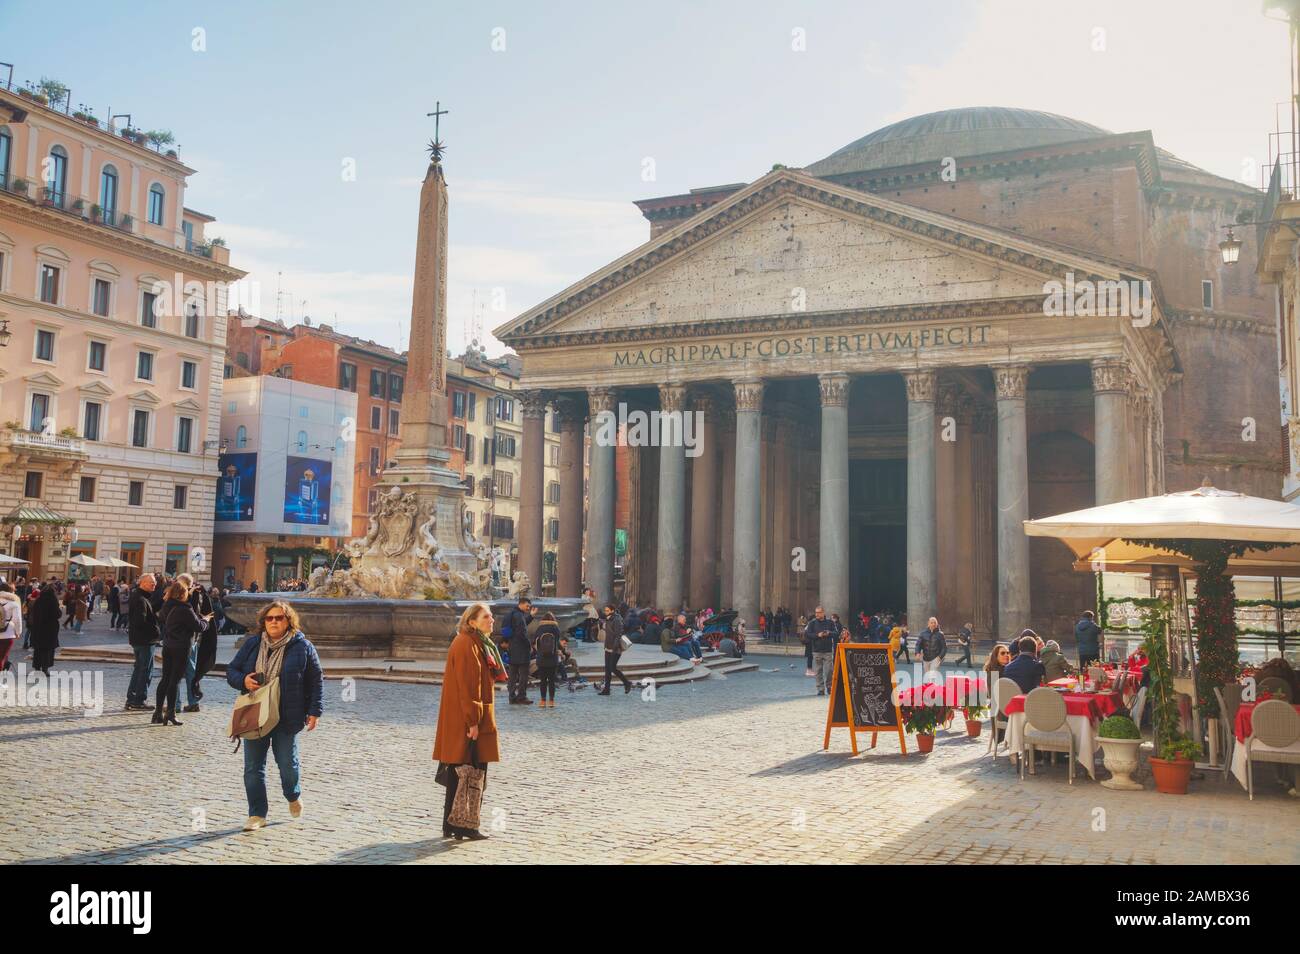 ROME - DECEMBER 12: Pantheon at the Piazza della Rotonda on December 12, 2019 in Rome, Italy Stock Photo